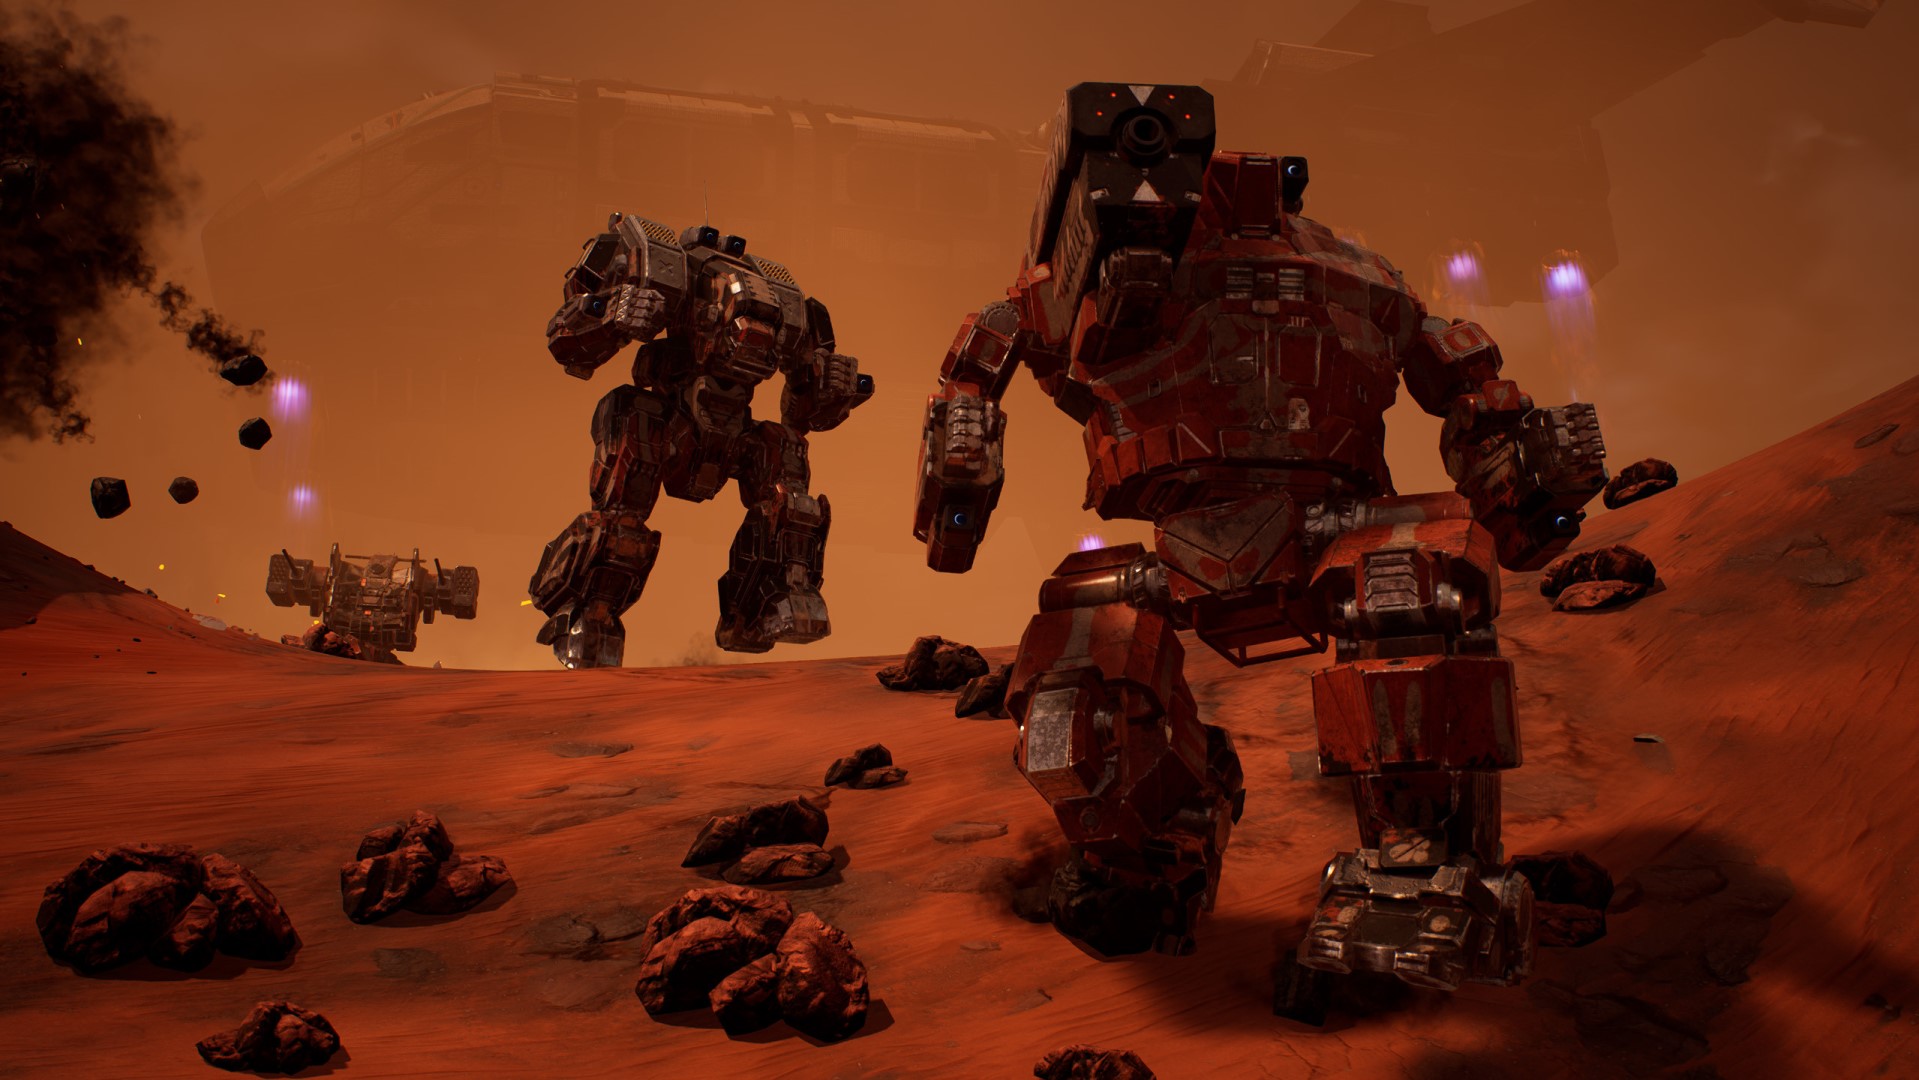 A new MechWarrior single-player game is in development